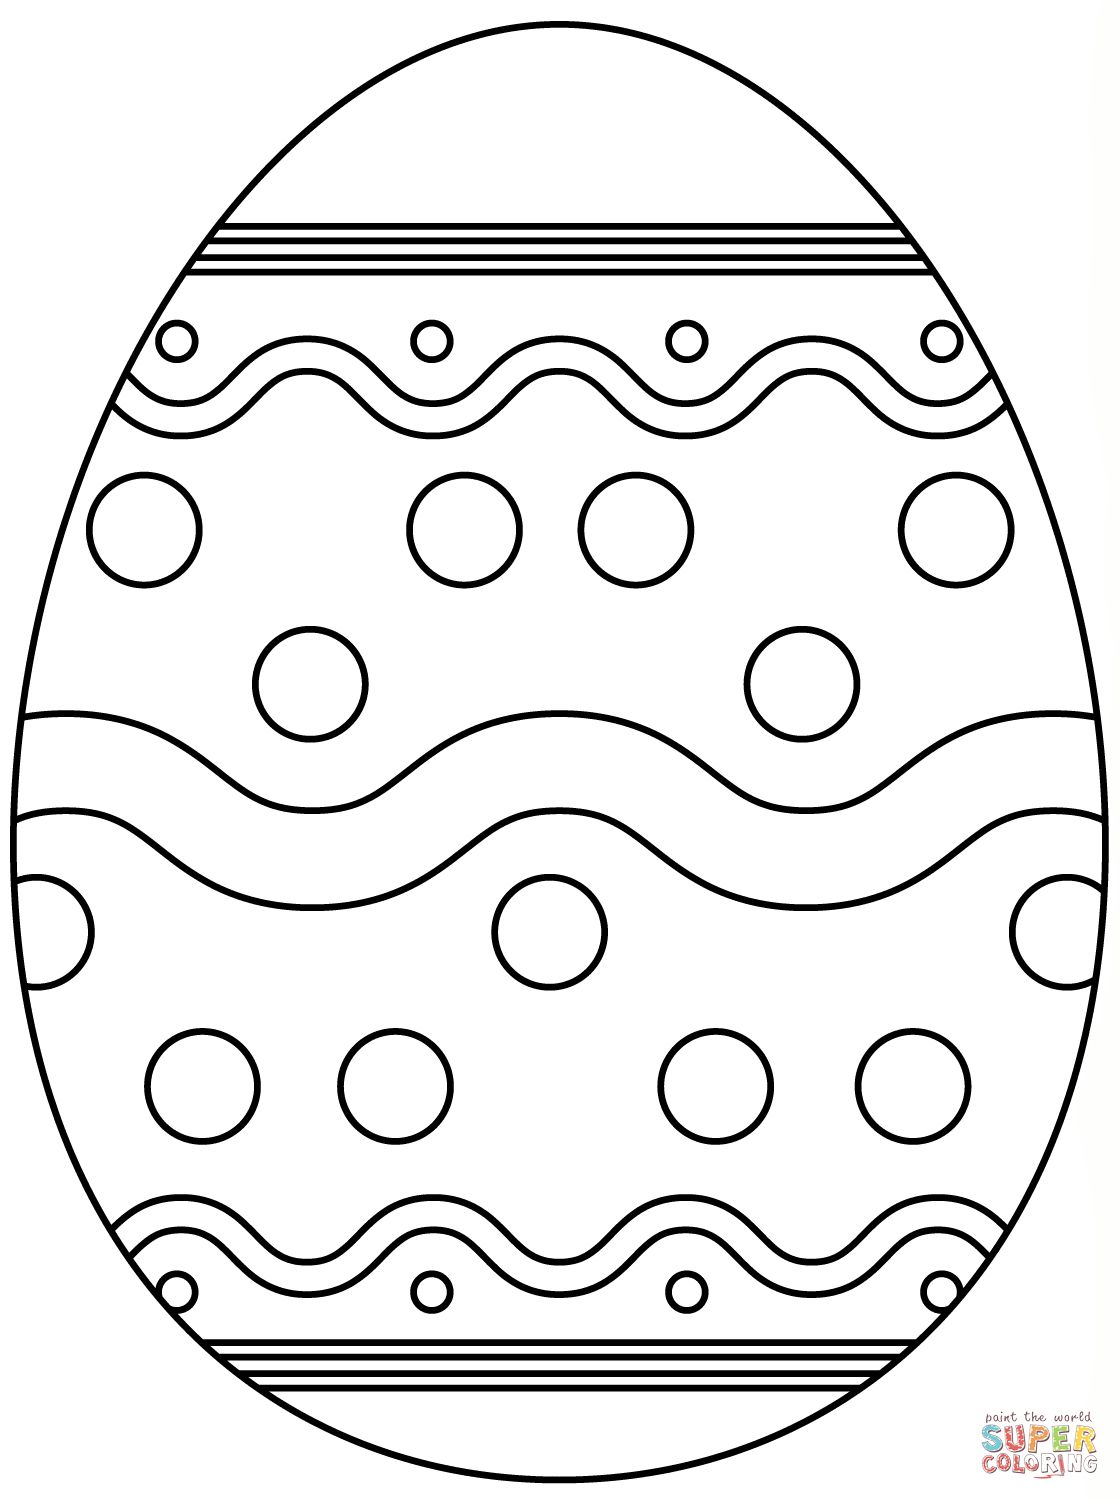 Easter Egg Colouring Pages Part 9